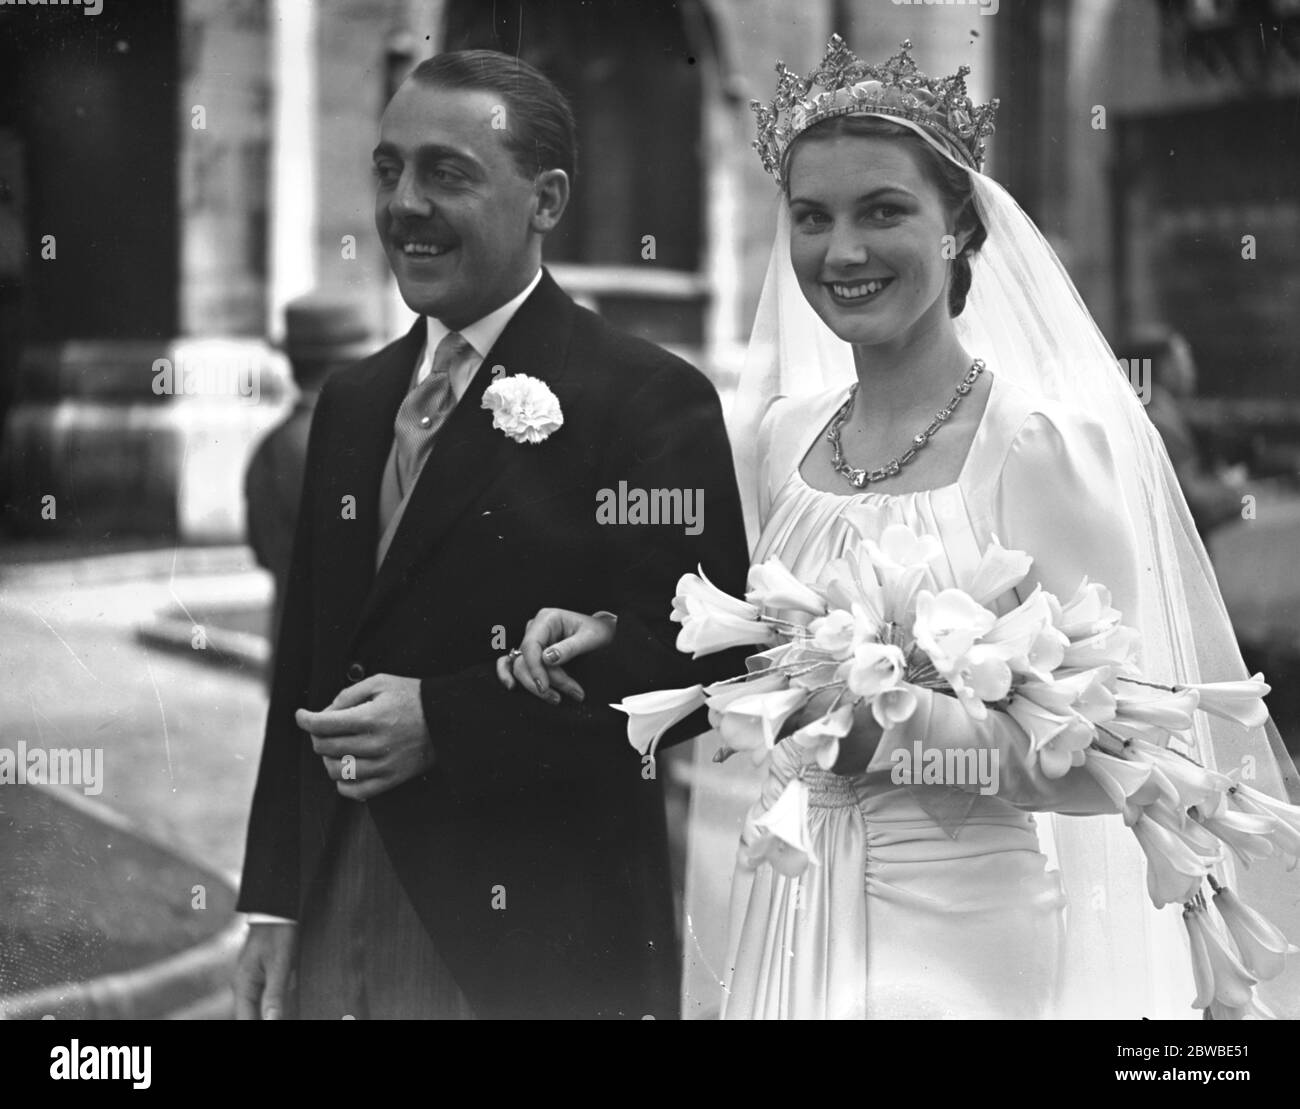 The wedding of Viscount Cowdray to the Earl of Bradford ' s daughter , Lady Anne Bridgeman , which took place today at St Margaret ' s Church , Westminster , London . Here the bride and groom leave the church . 19 July 1939 Stock Photo